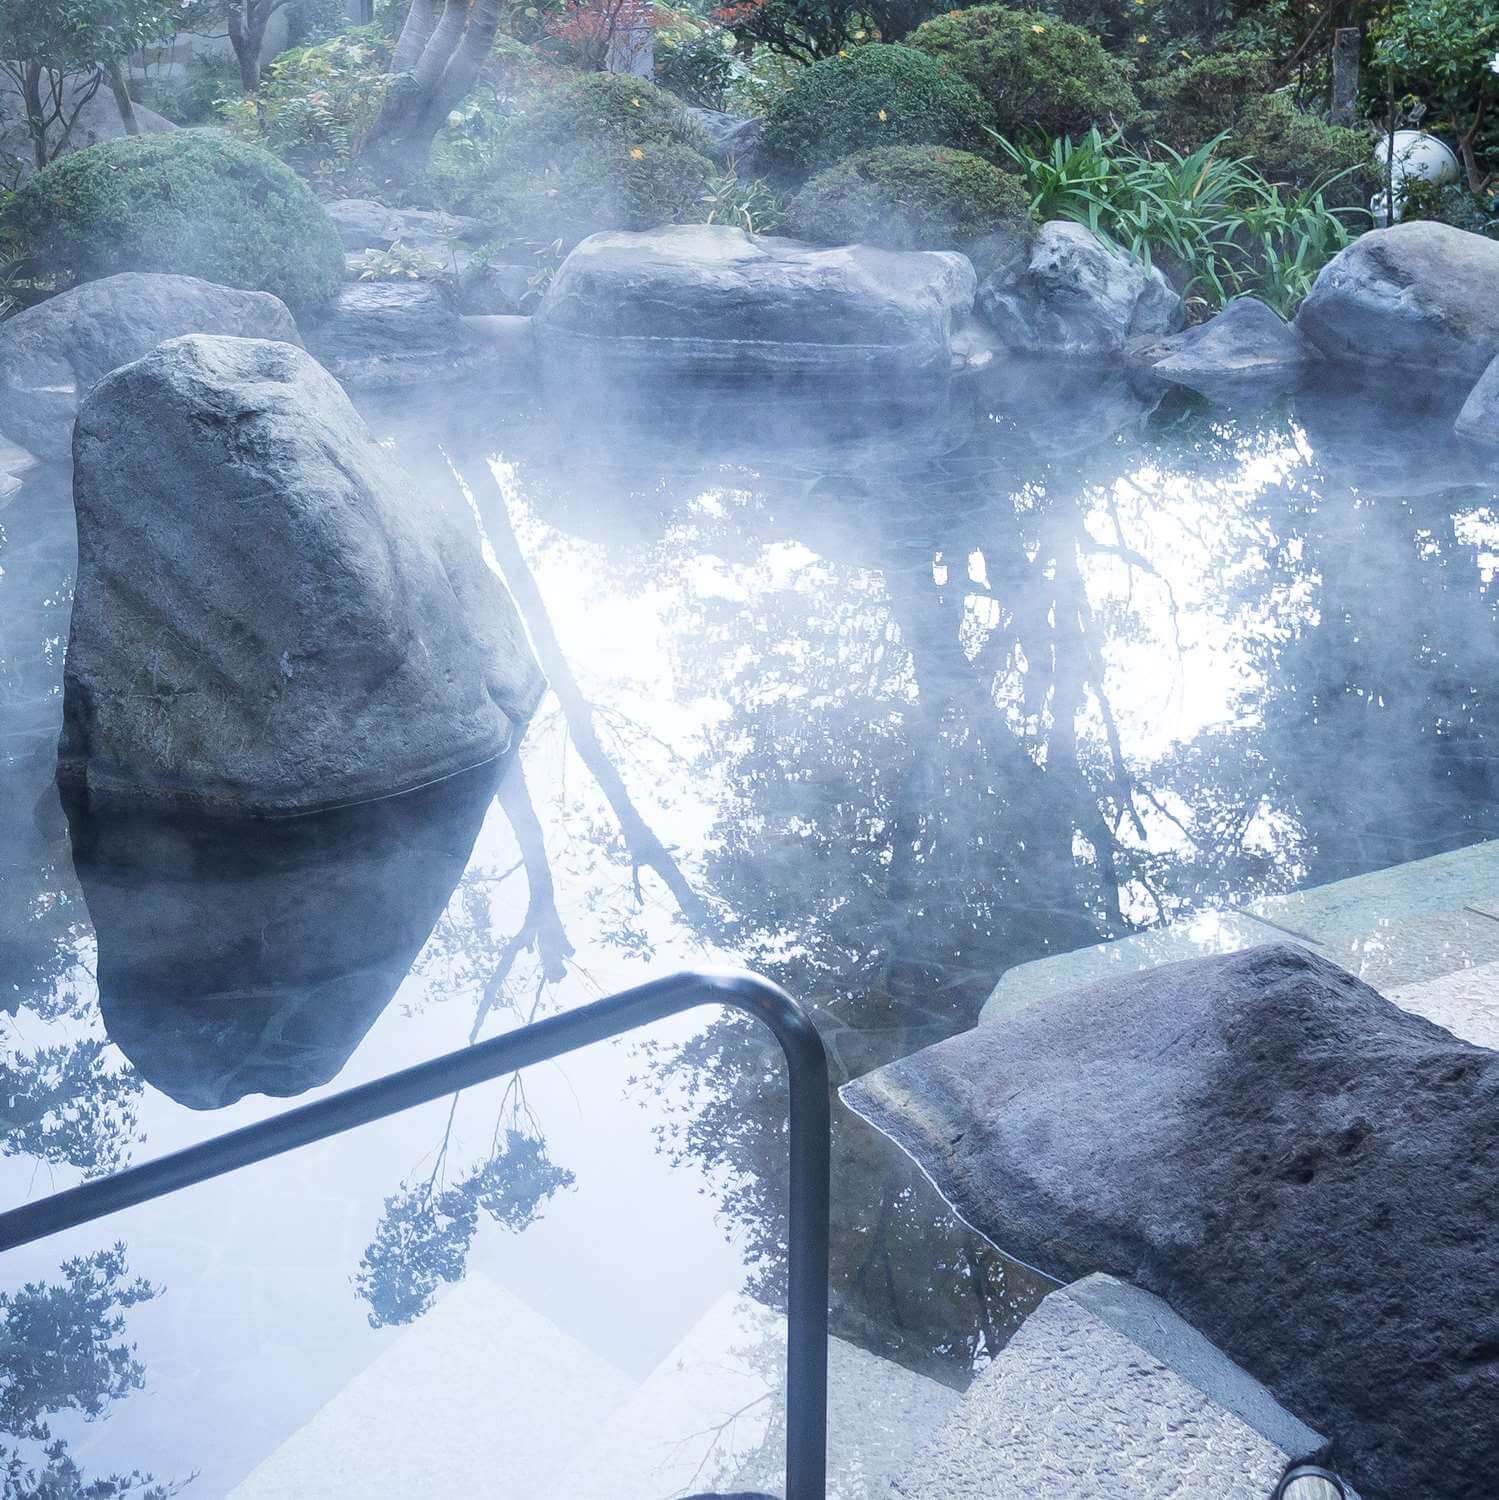 Hakone, Kanagawa Prefecture, famous for its scenic hot springs = Shutterstock 6